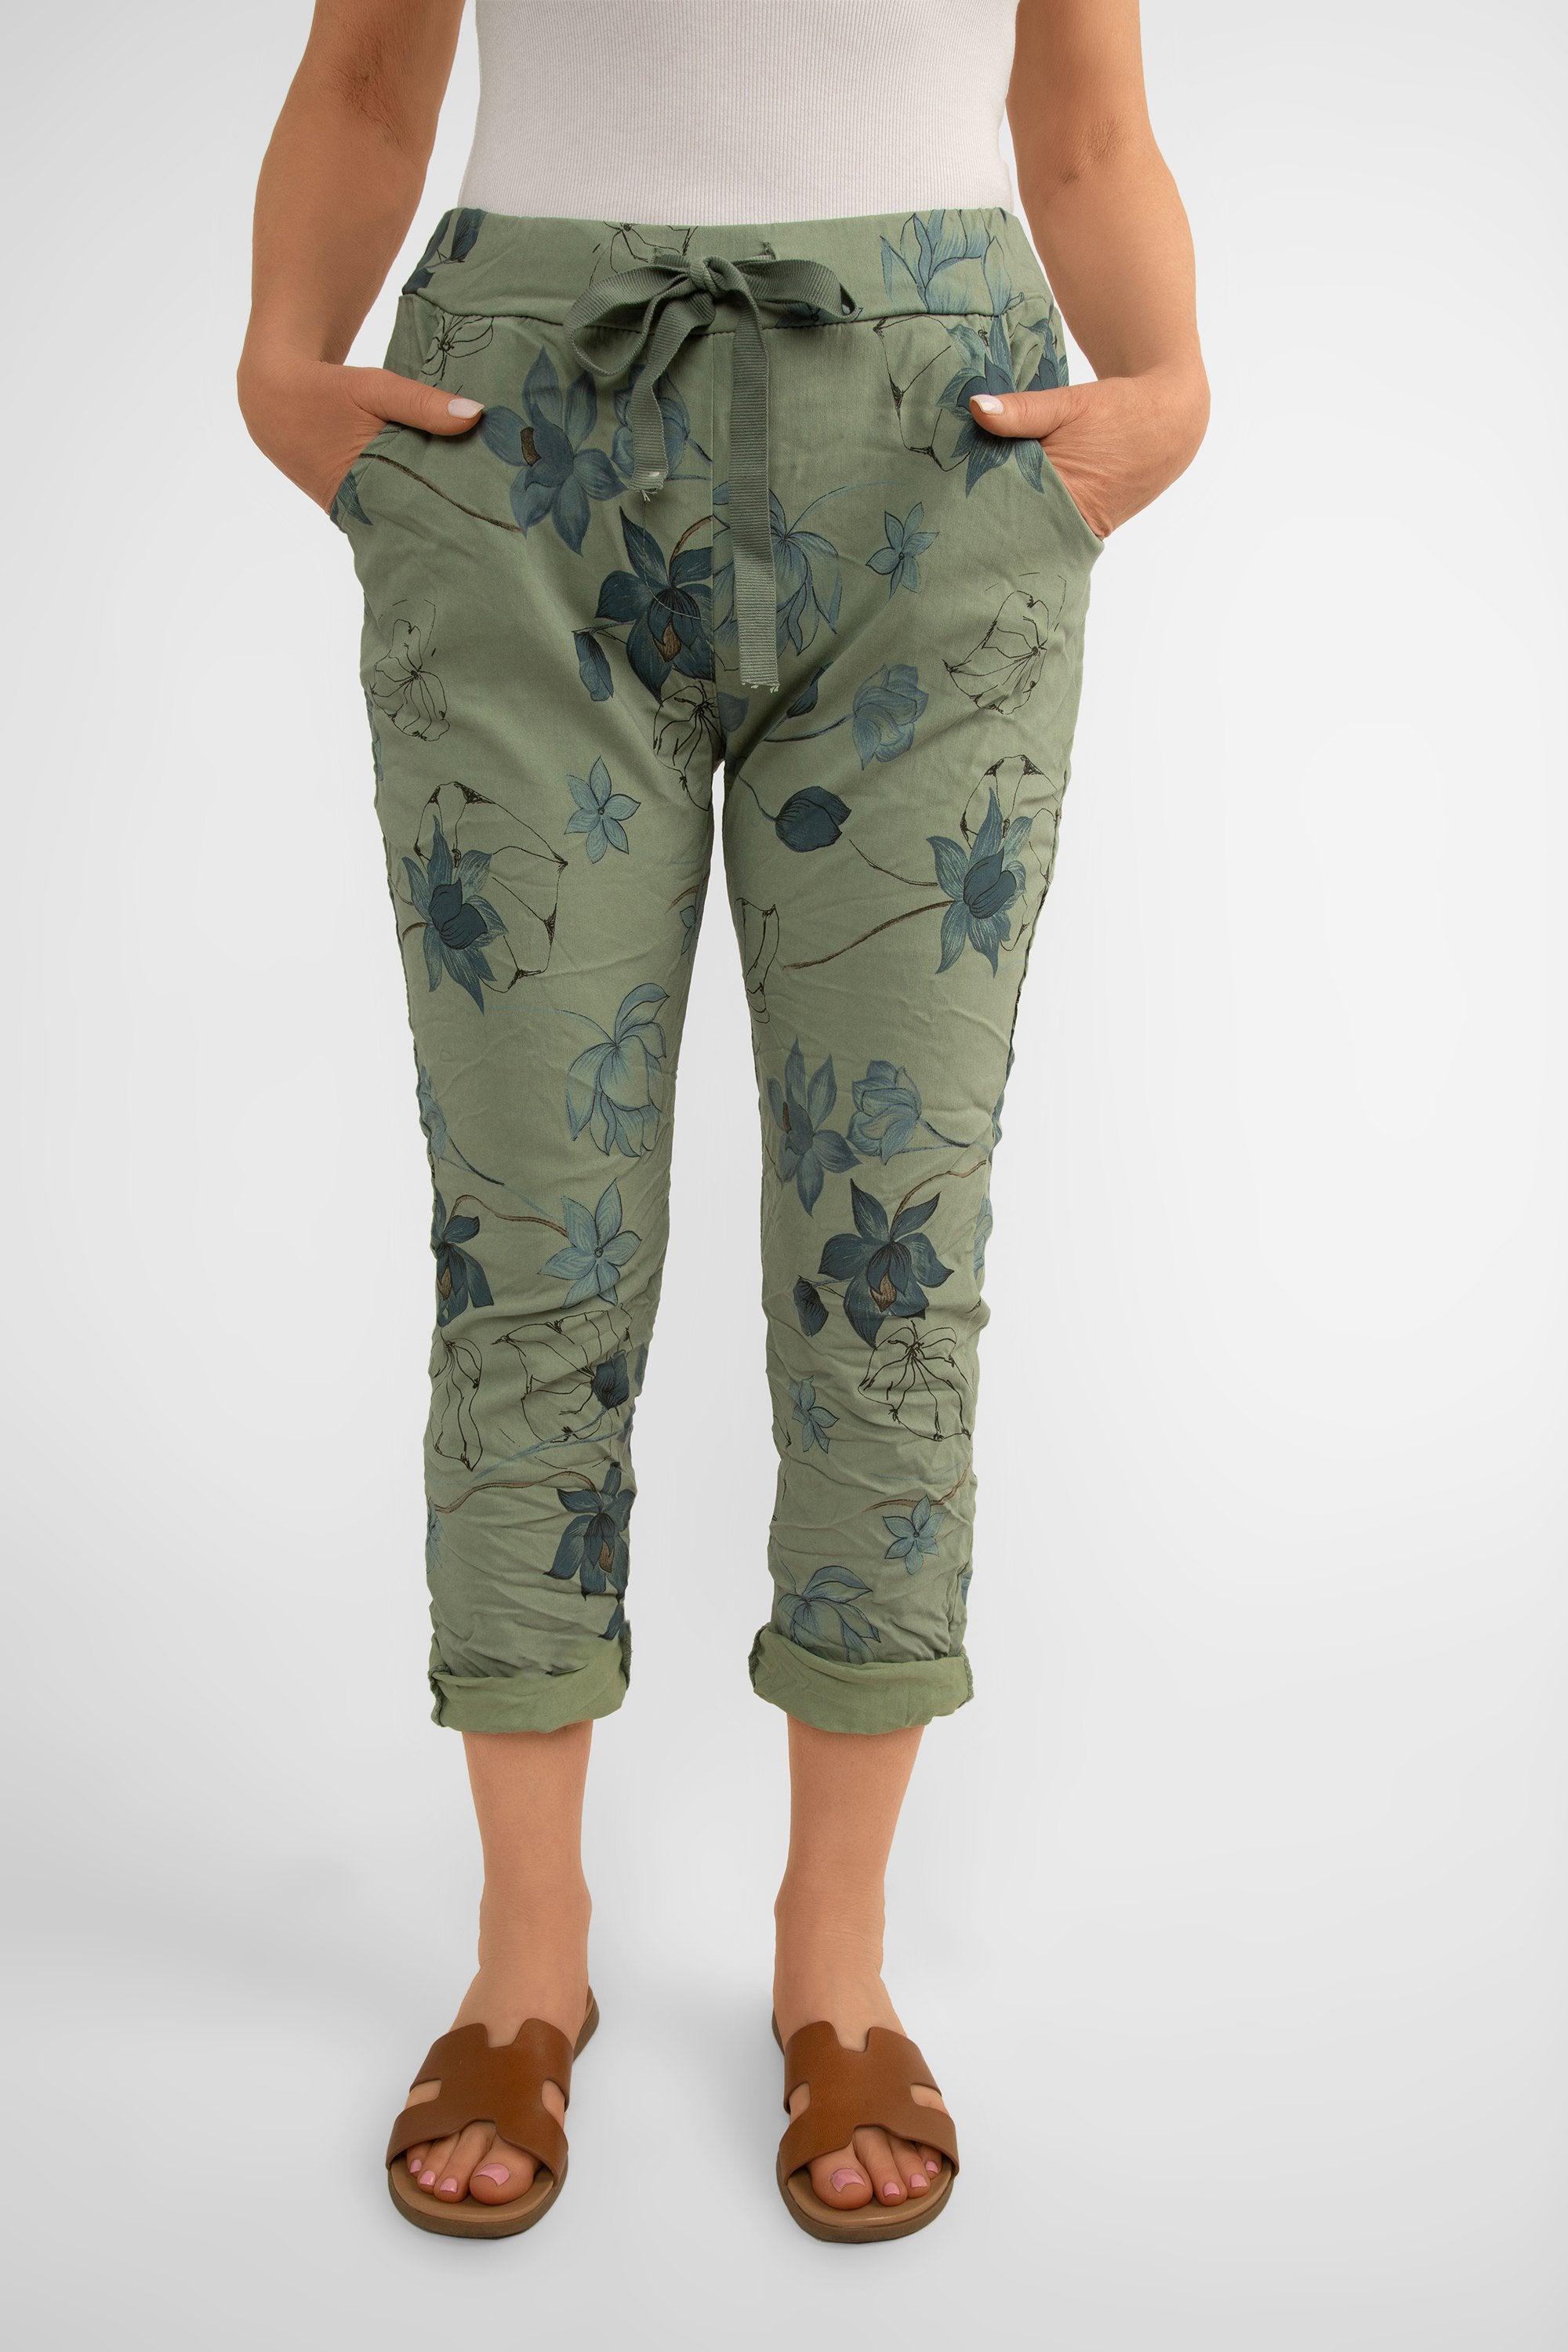 Bella Amore (21036) Women's Pull On Crinkle Pants with Side Pockets, Rolled Hem, and Blue Lotus Flower Print in Military Green